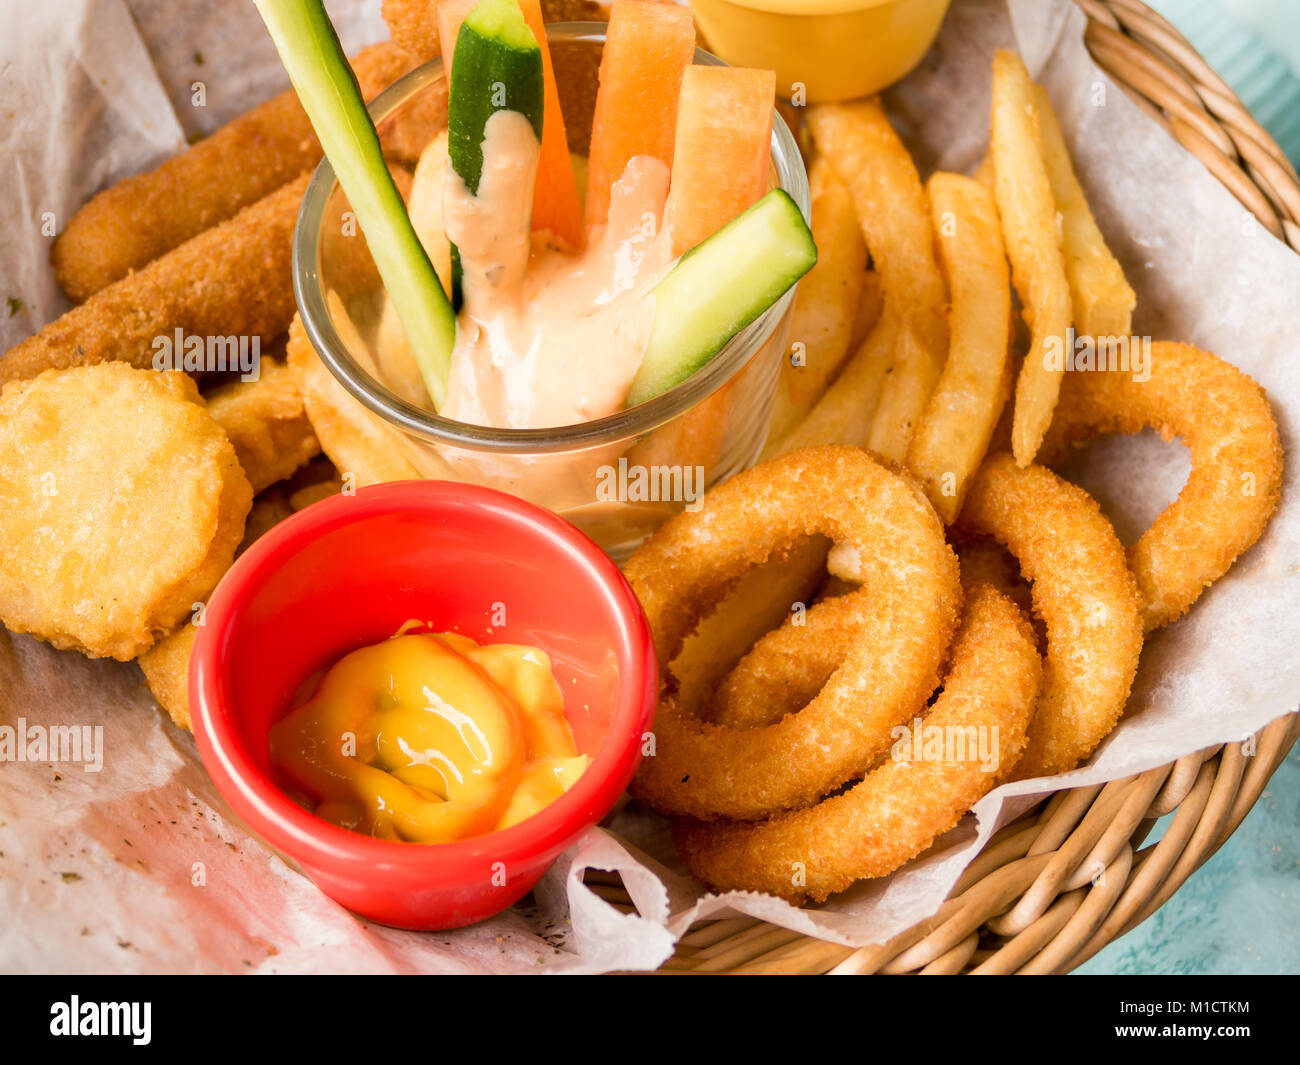 Platter of fried food, cheese sticks, onion rings, chicken nuggets Stock  Photo - Alamy